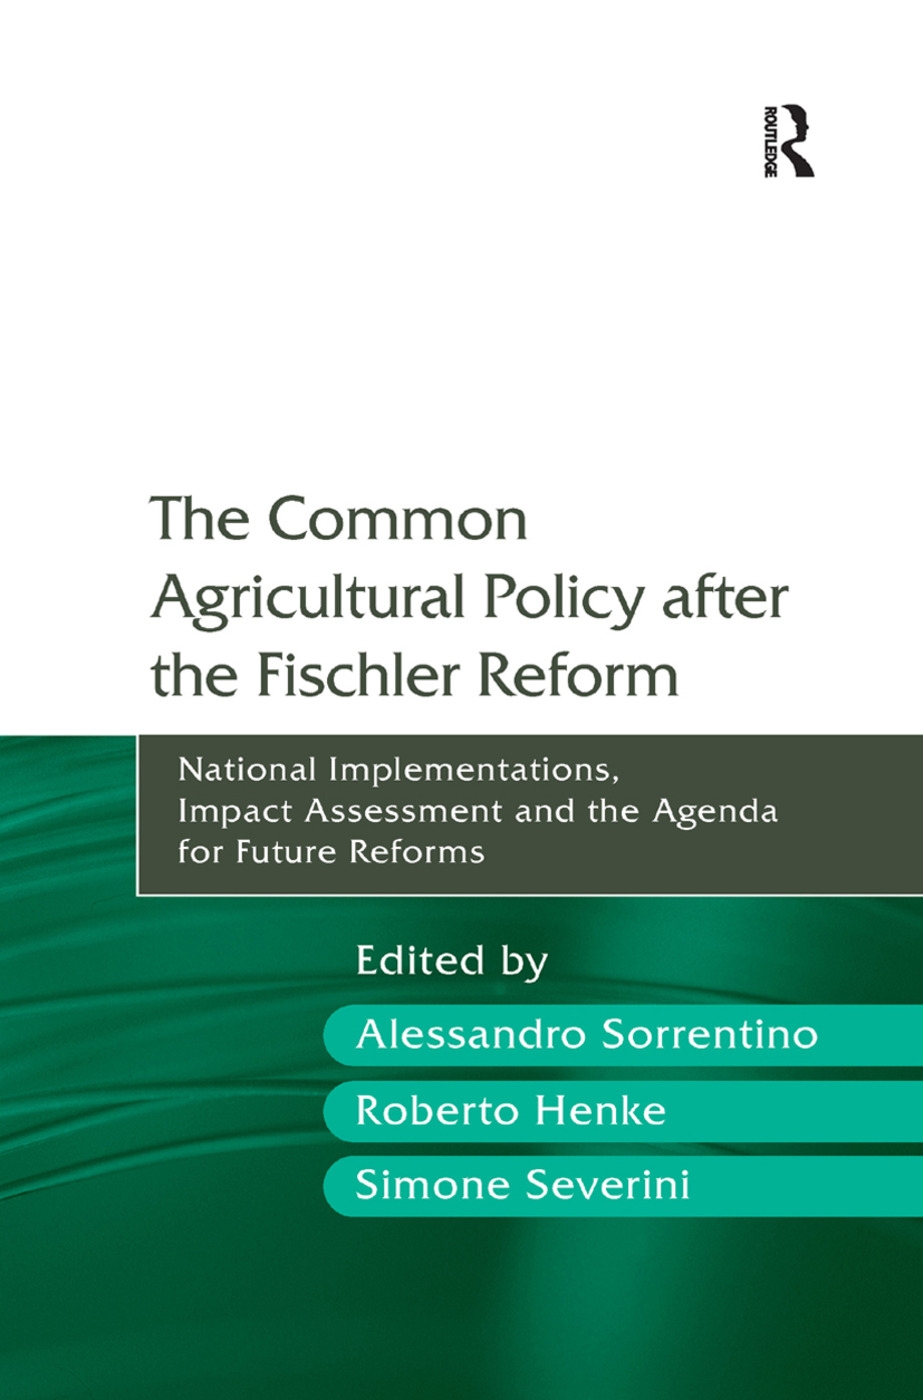 The Common Agricultural Policy After the Fischler Reform: National Implementations, Impact Assessment and the Agenda for Future Reforms